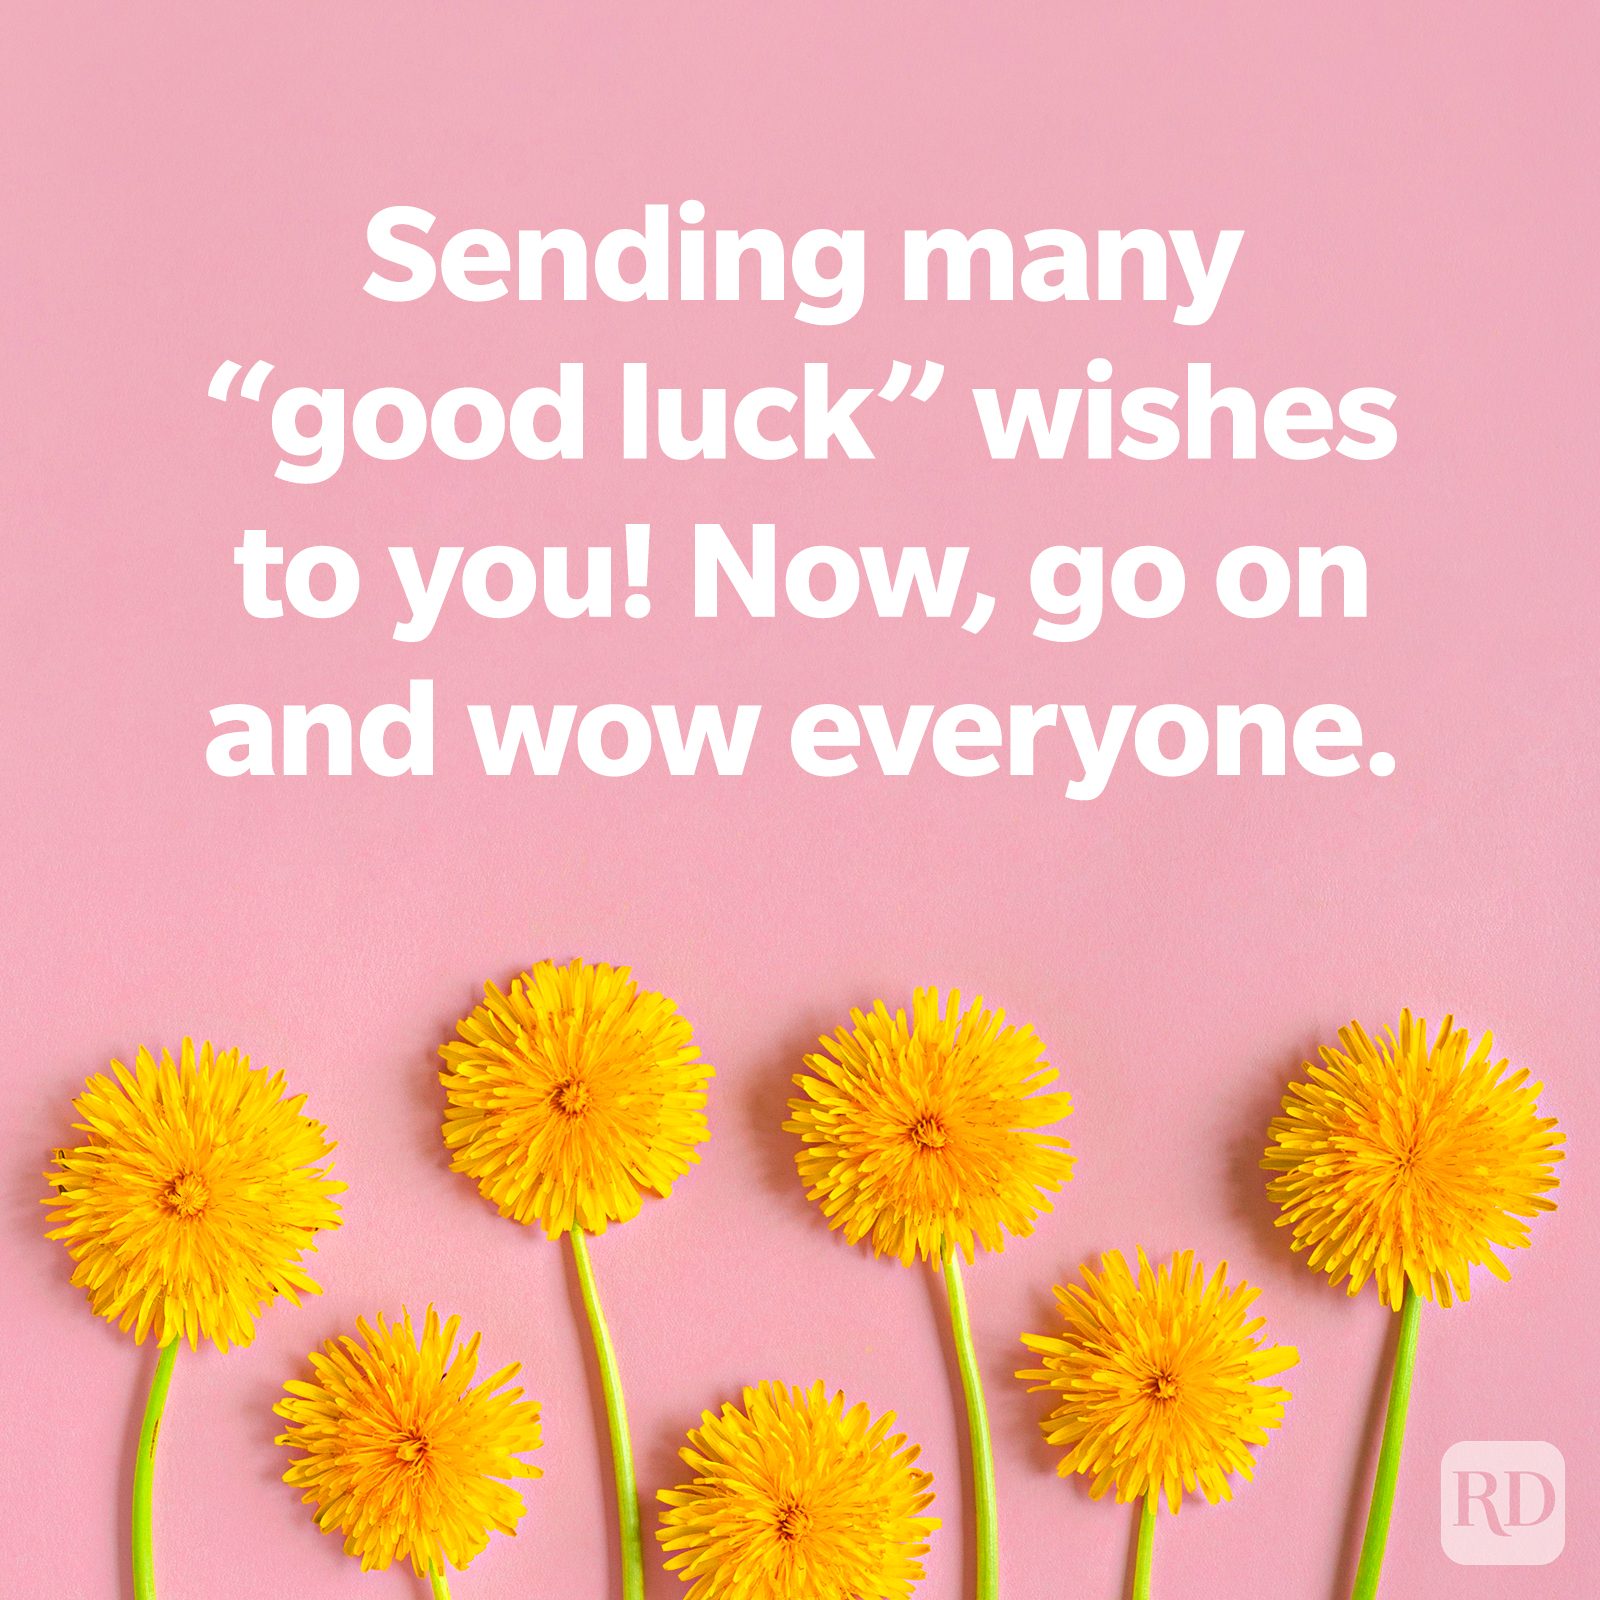 Dandelions on a pink background, TEXT: Sending many good luck wishes to you! Now, go on and wow everyone.